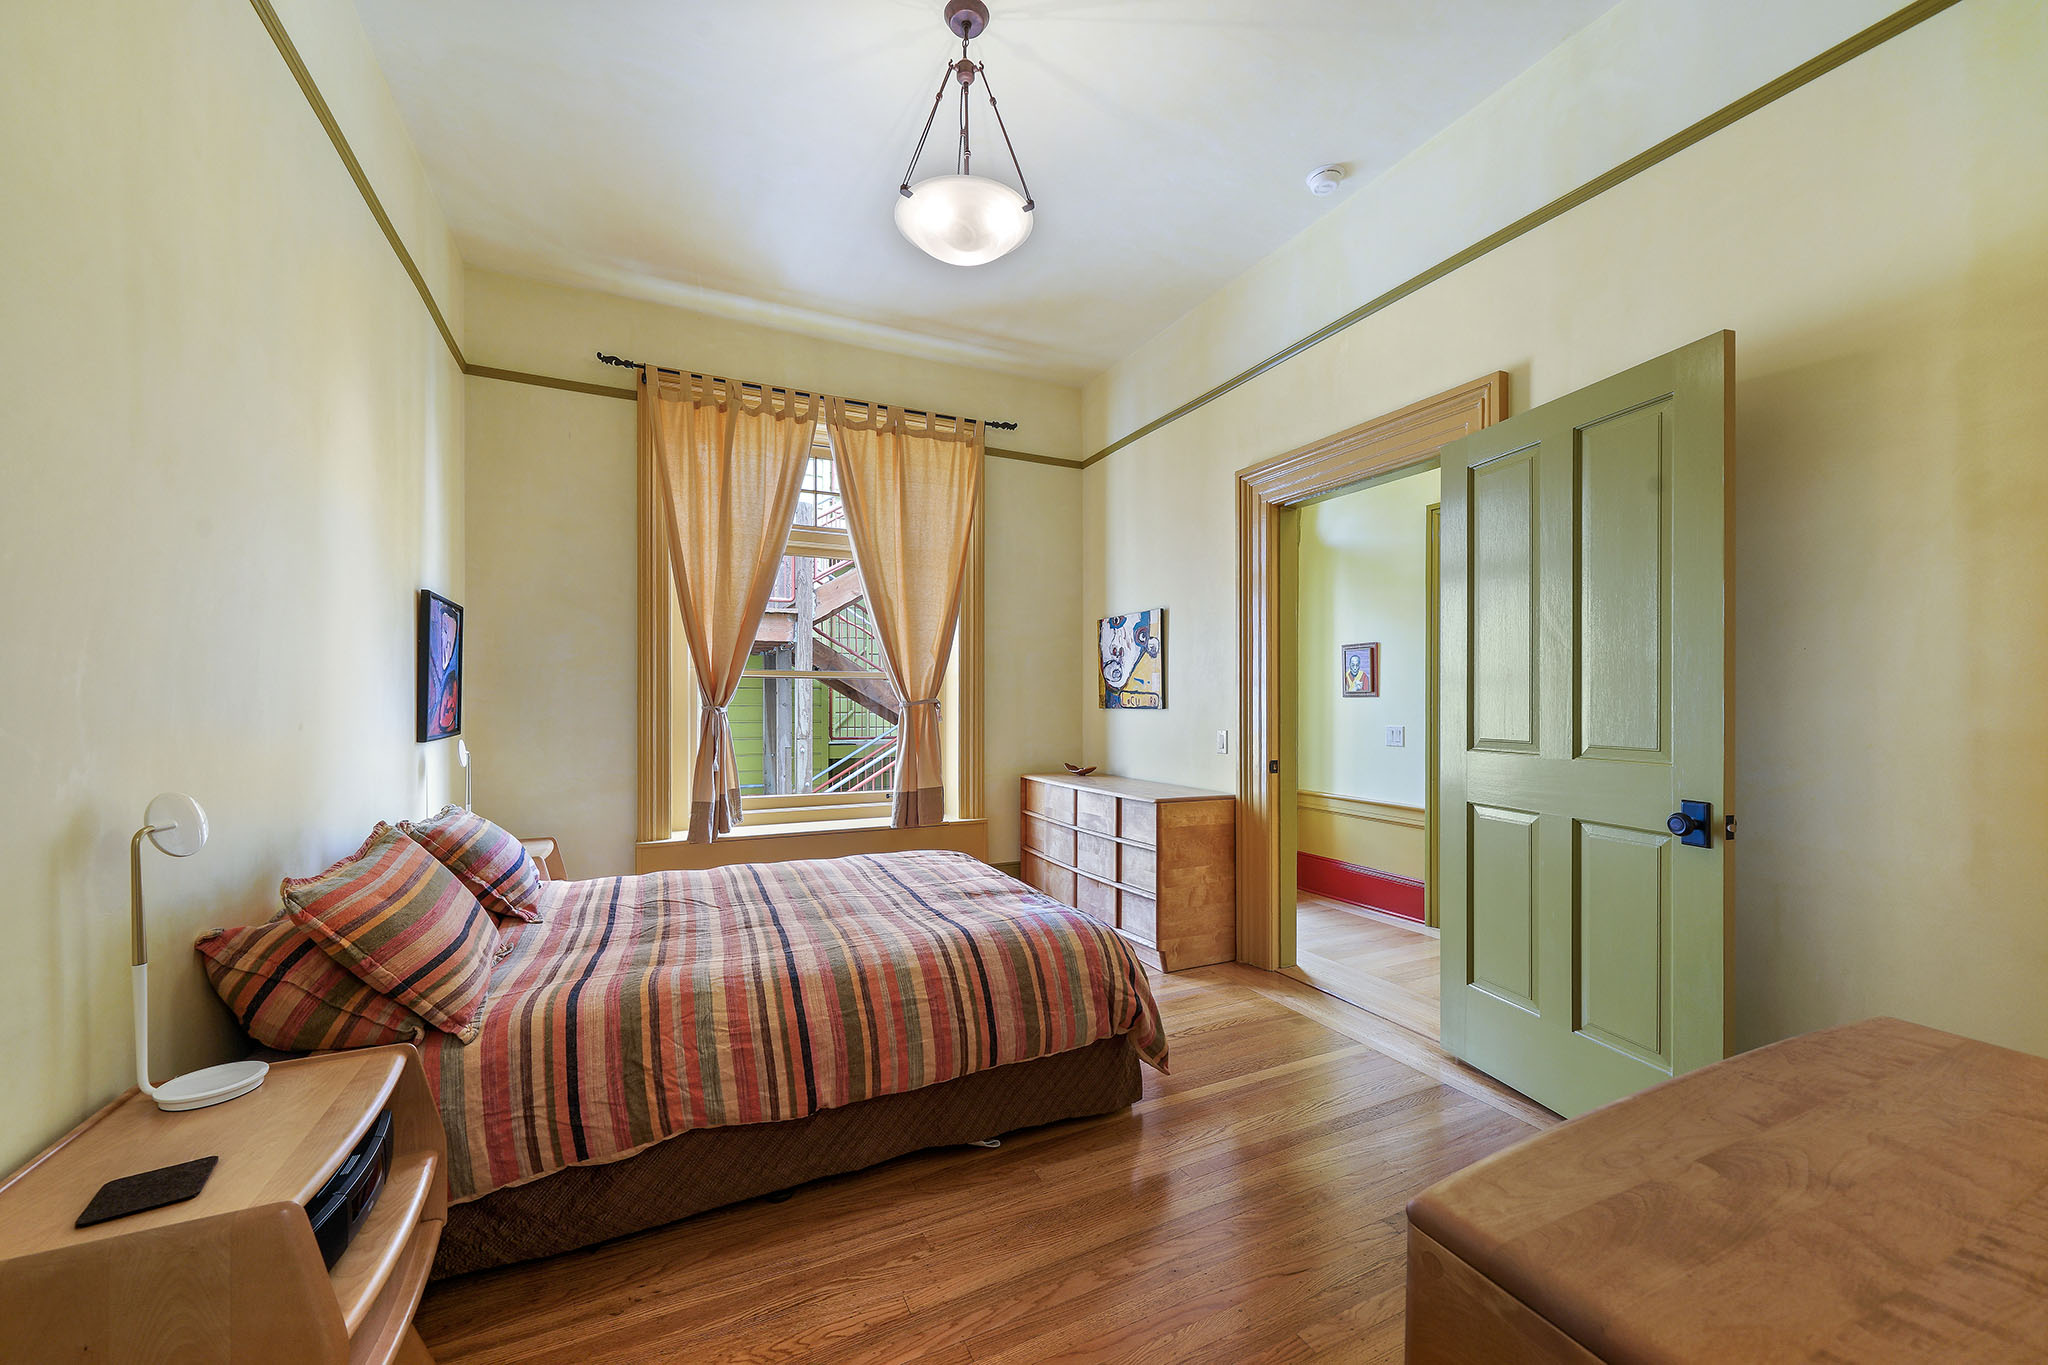 Property Photo: Bedroom with large windows and wide wood trim